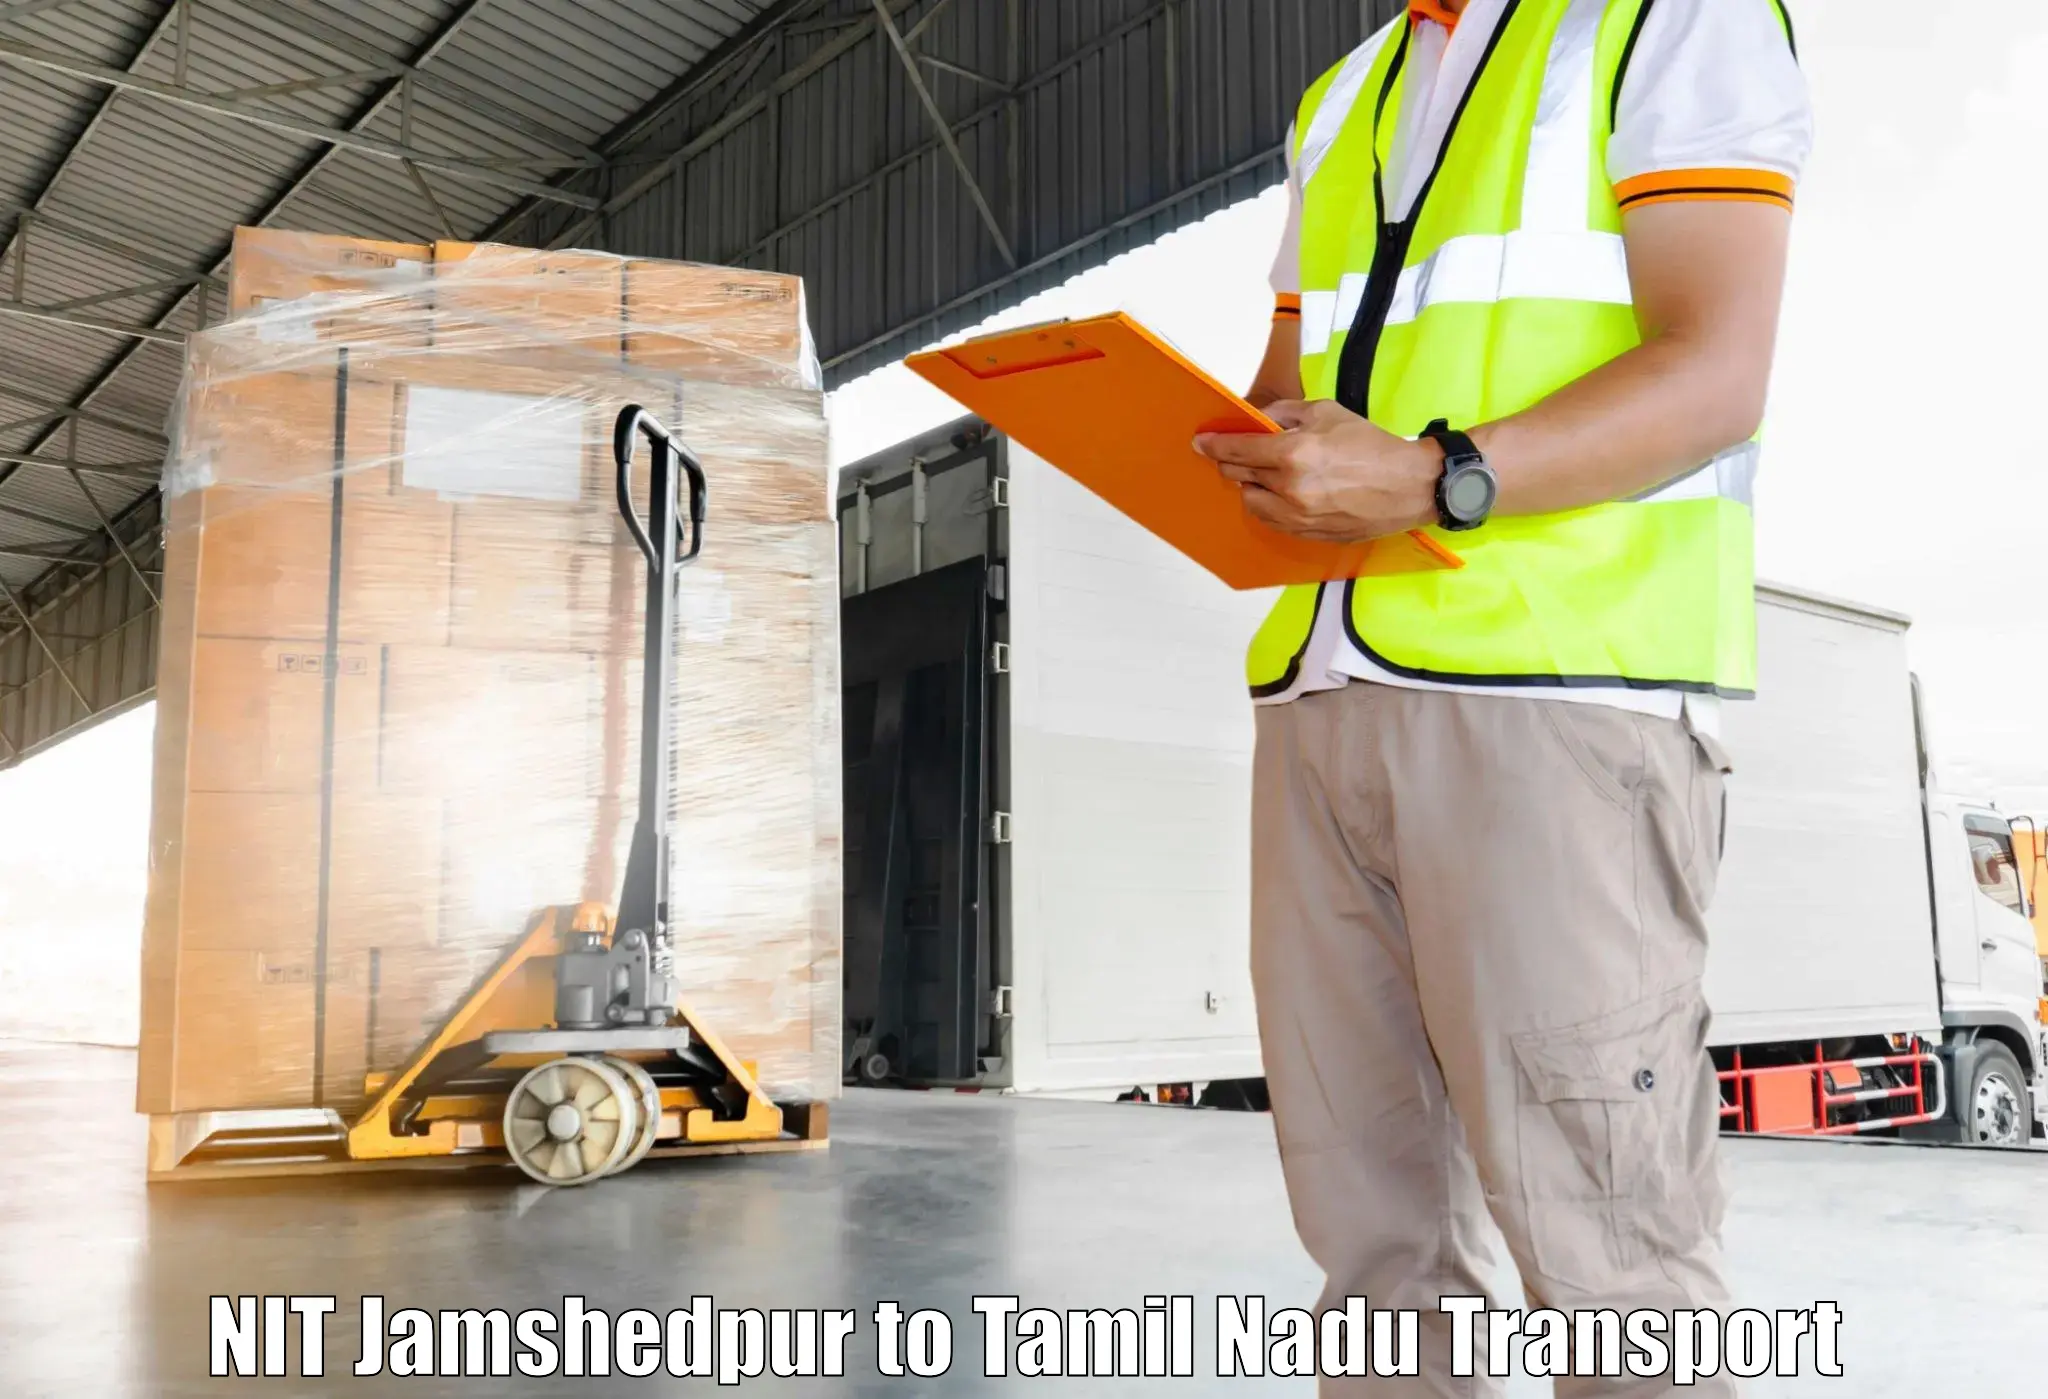 Commercial transport service NIT Jamshedpur to Perambalur